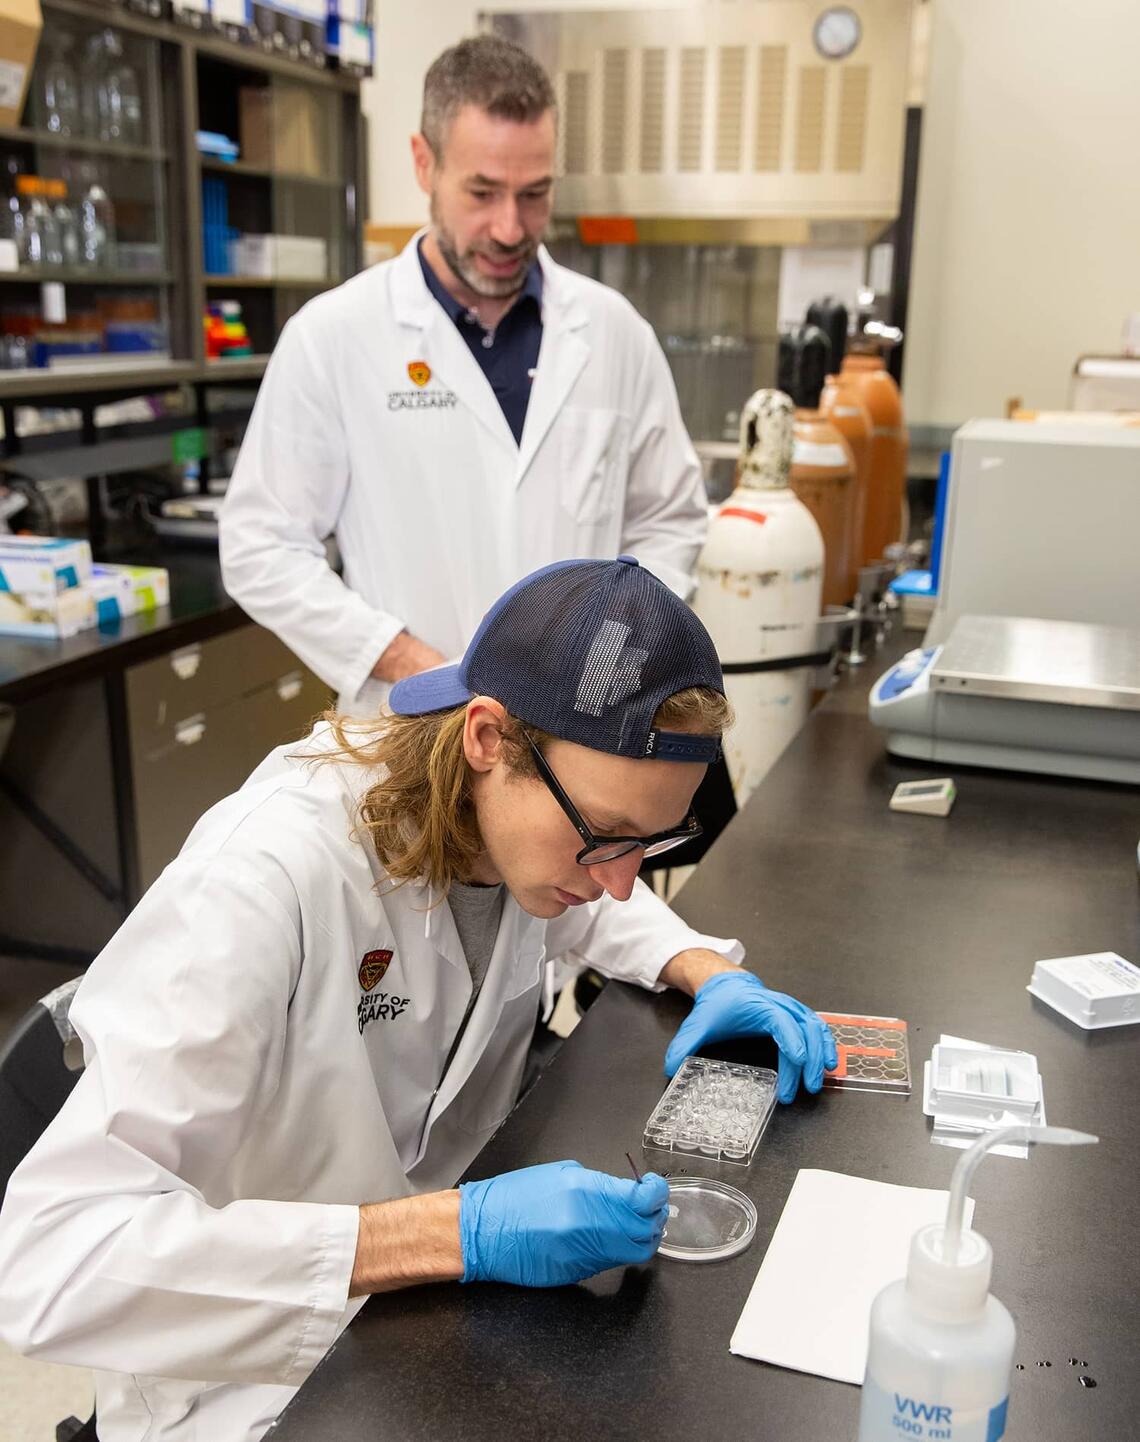 Graduate student Robert Aukema is in the lab, placing thin slices of rat brain on a Petri dish, while Dr. Matthew Hill stands behind supervising.